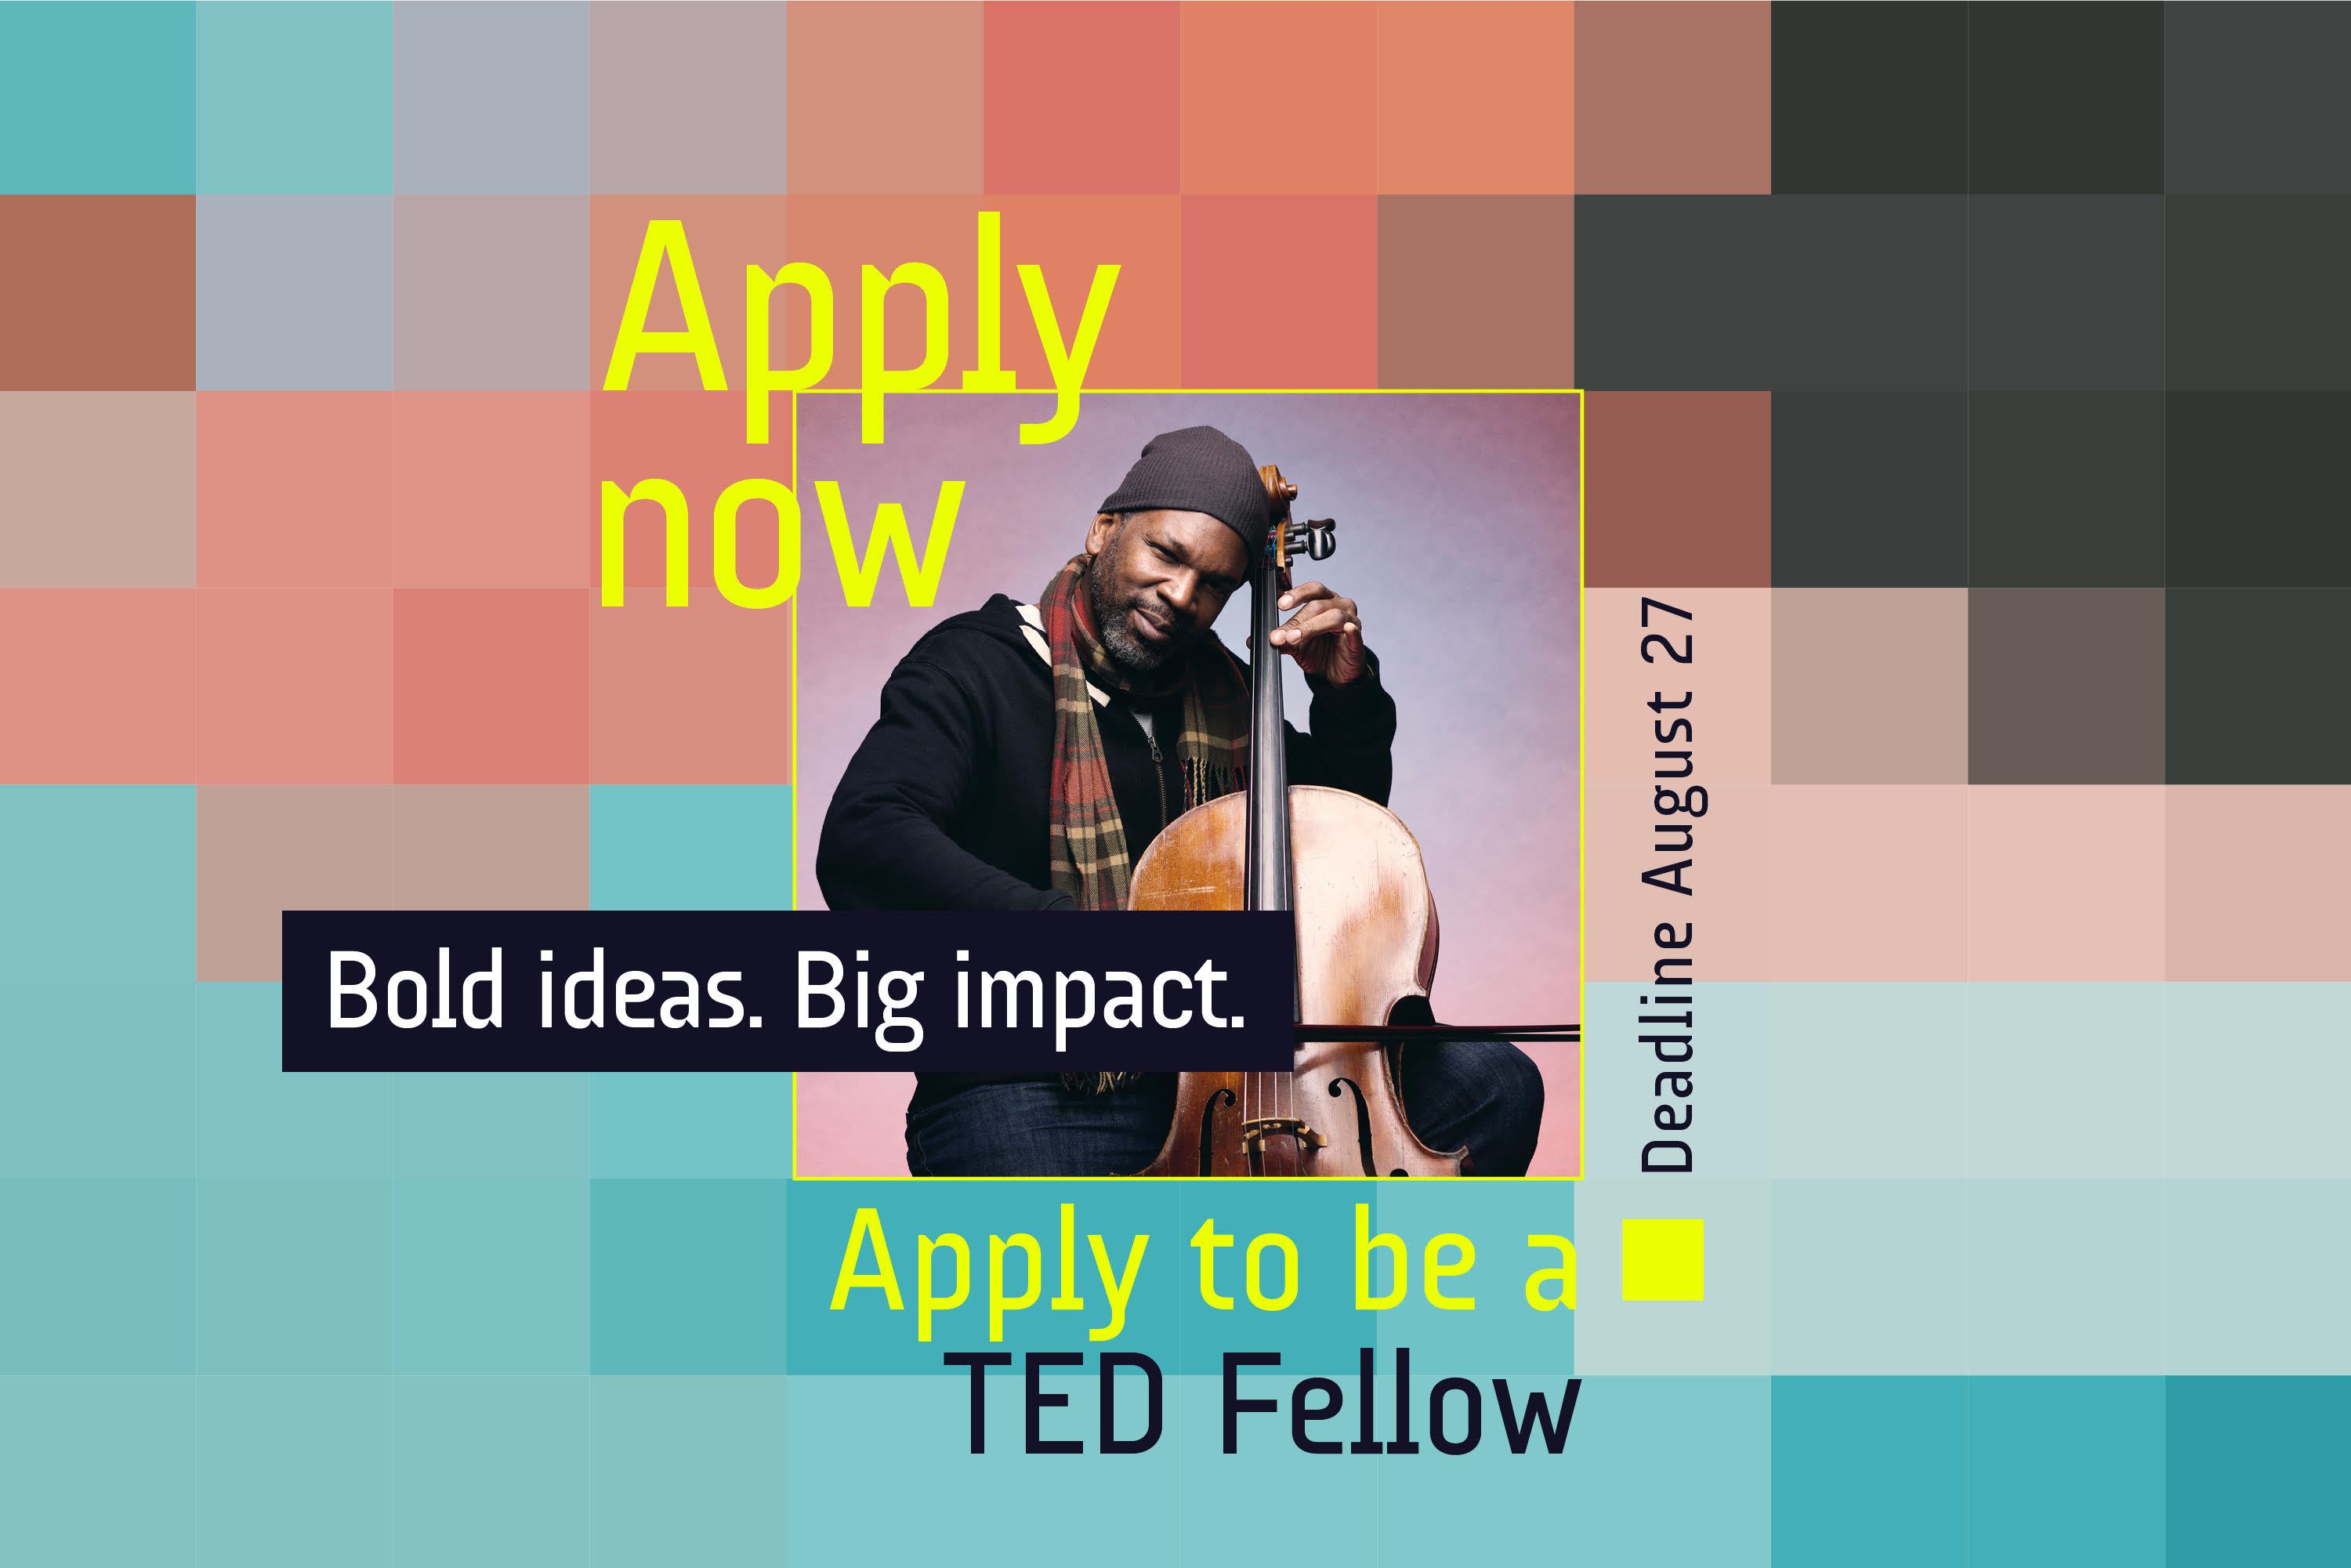 Apply to be a TED2020 Fellow